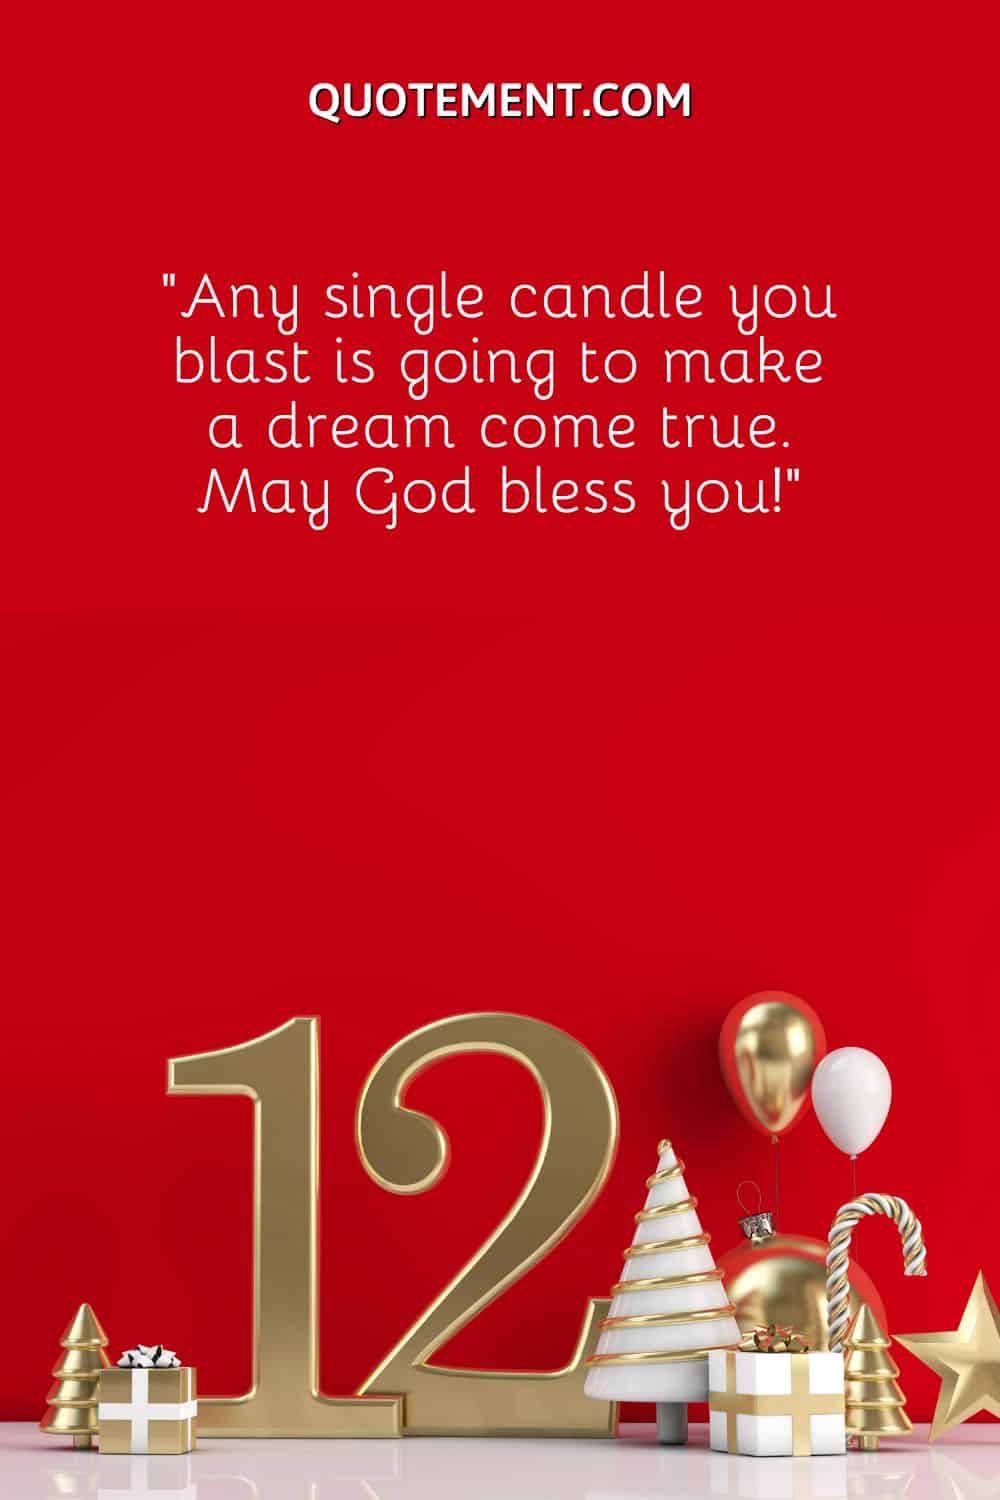 “Any single candle you blast is going to make a dream come true. May God bless you!”..